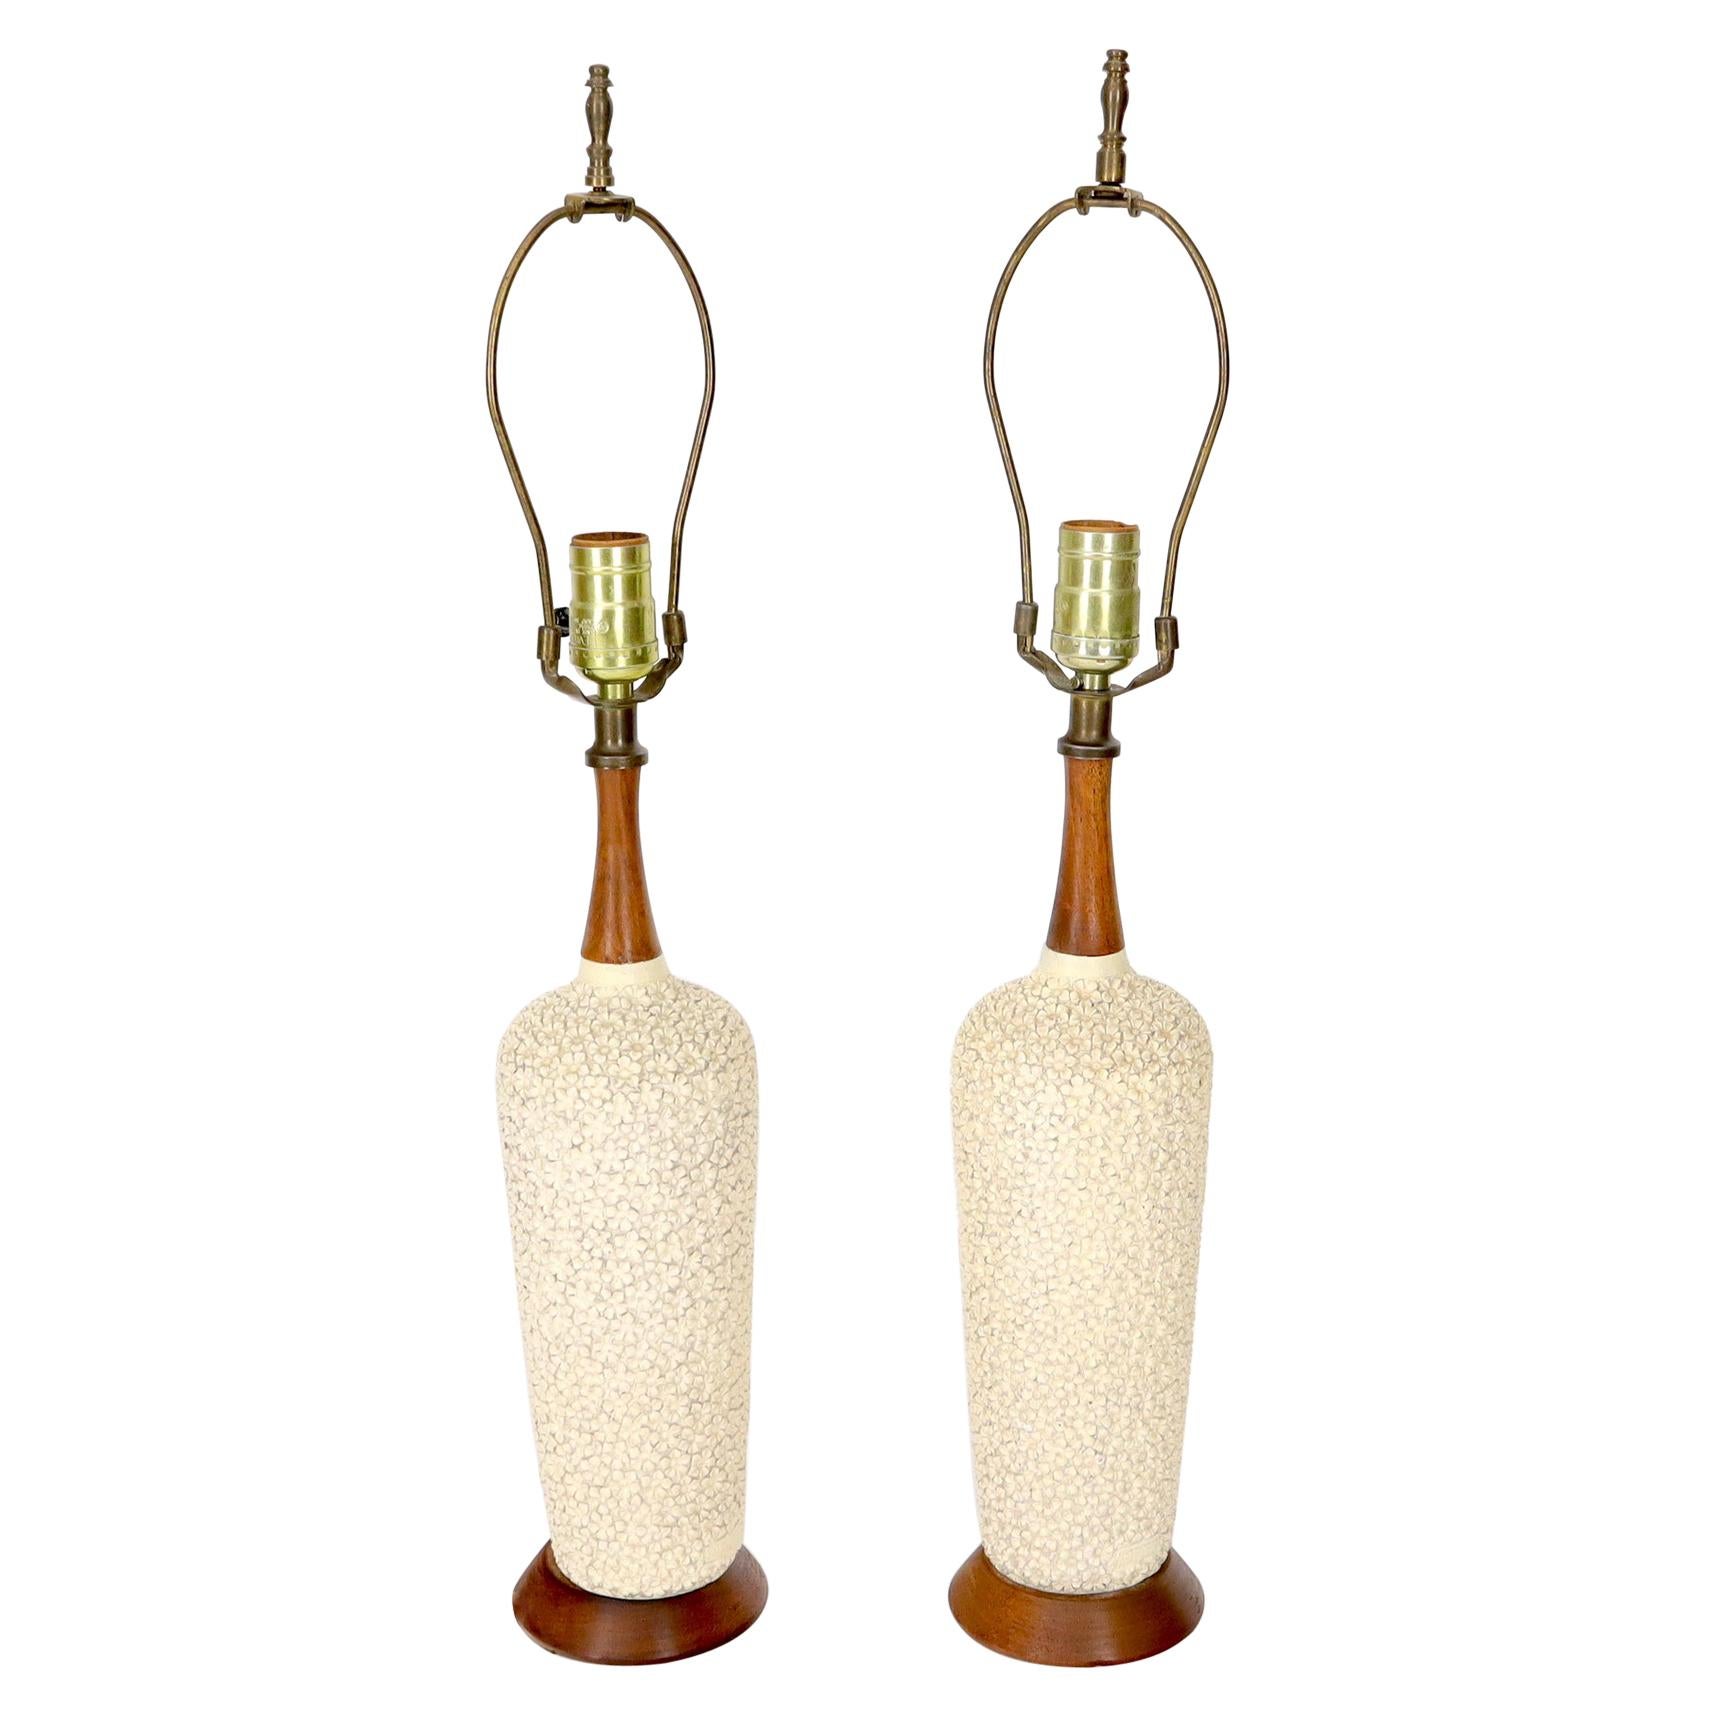 Pair of Pottery and Walnut Mid-Century Modern Table Lamps